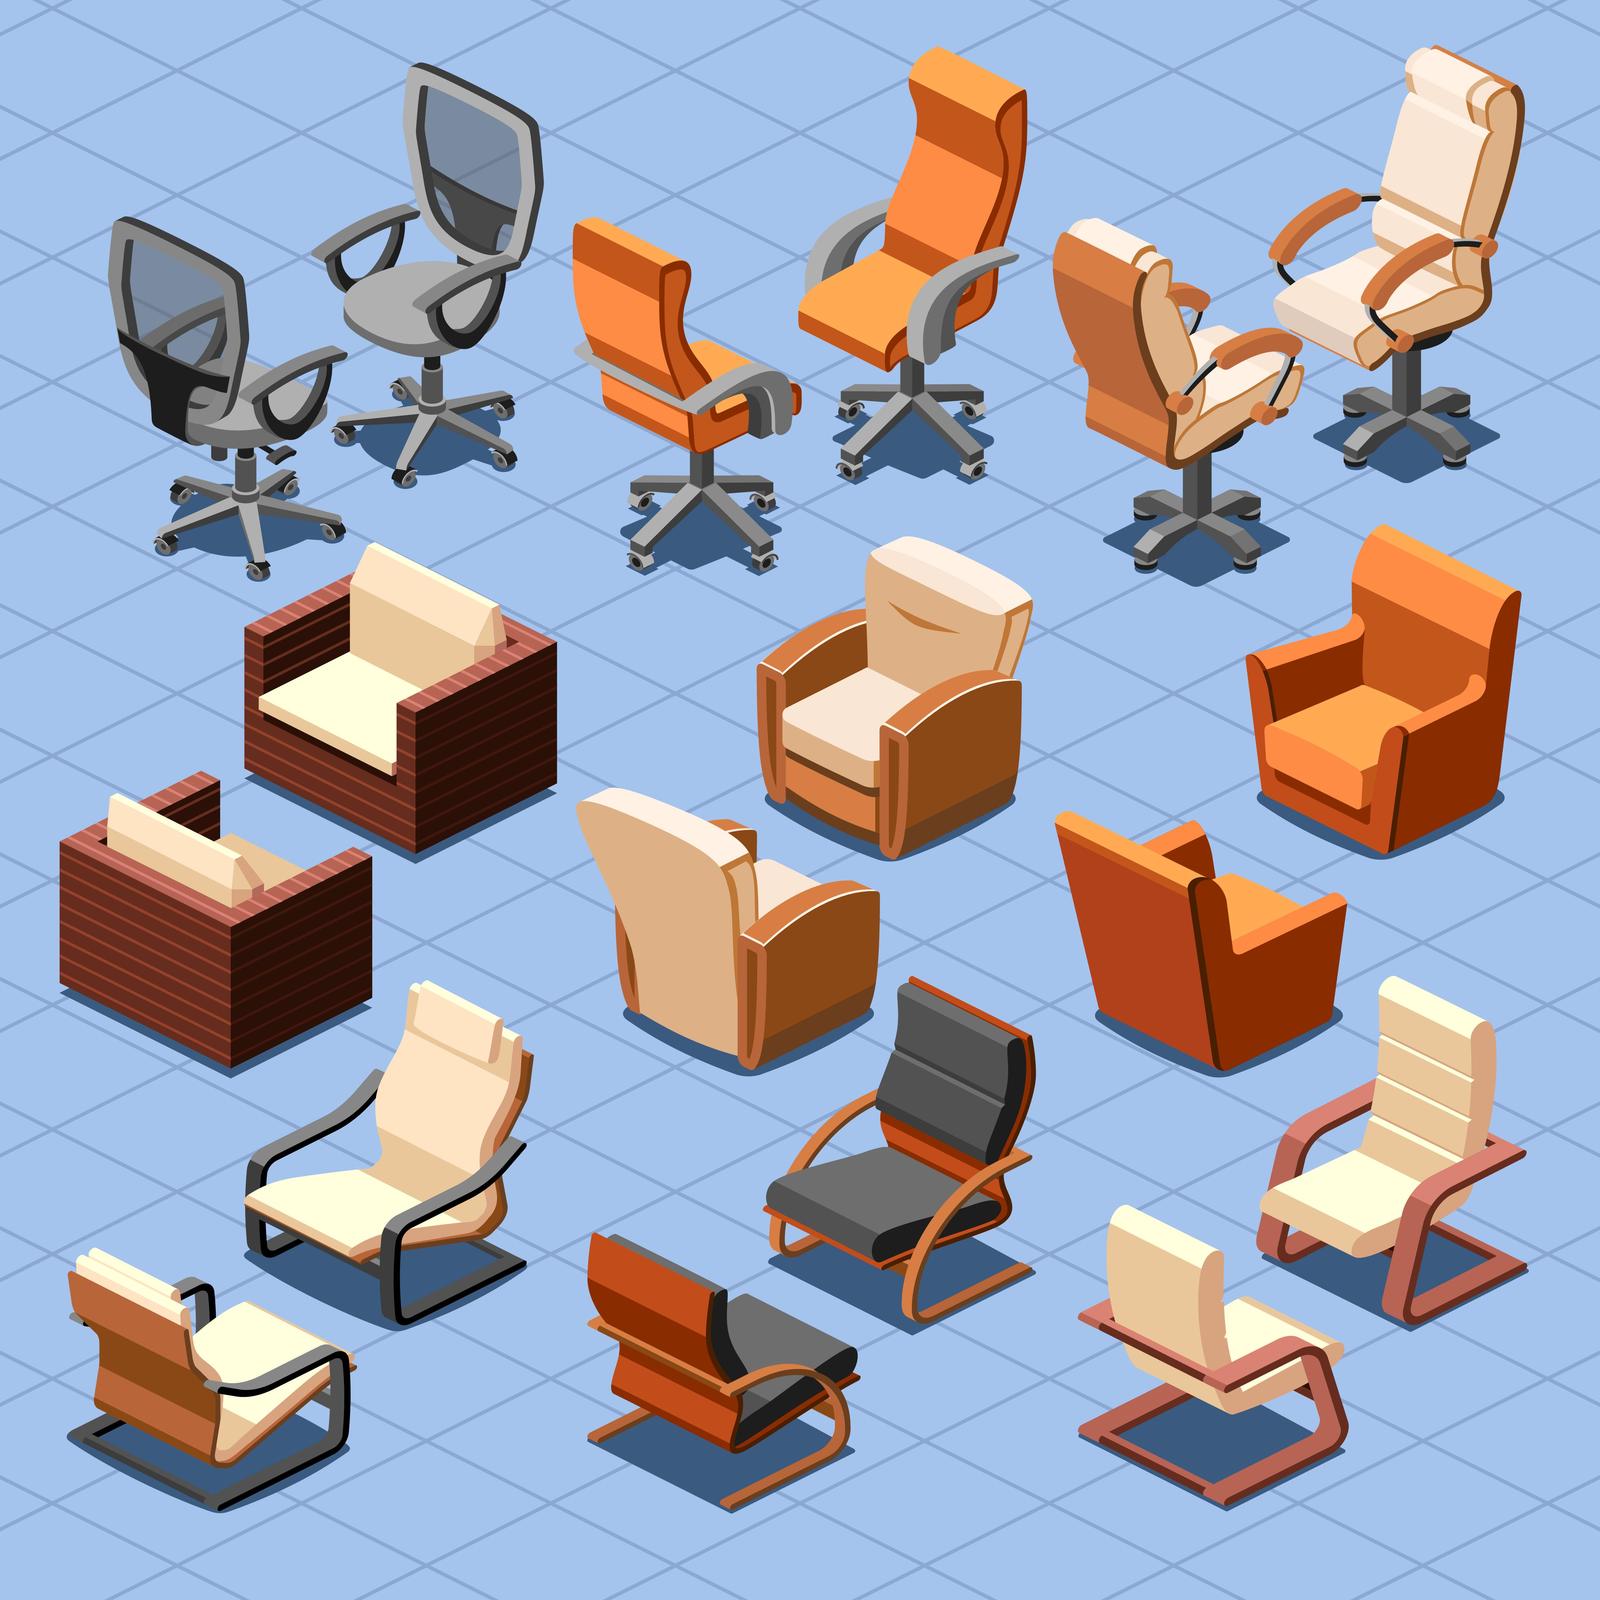 Ergonomic Office Chairs: A Comparison of the Best Brands